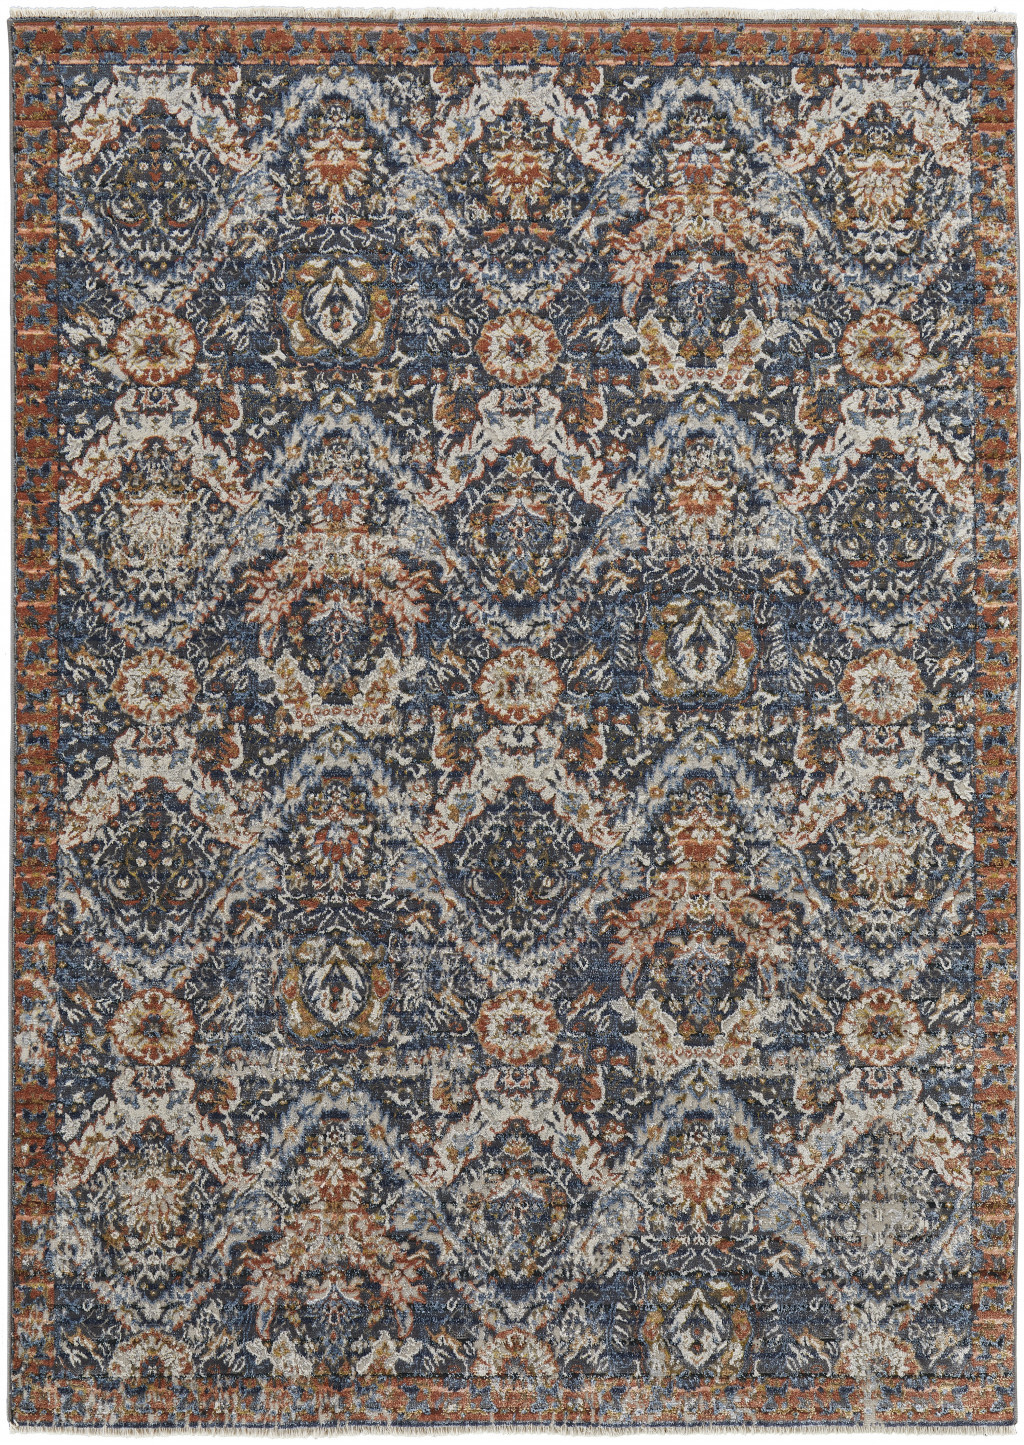 12' X 15' Blue Orange And Ivory Floral Power Loom Area Rug With Fringe-513996-1